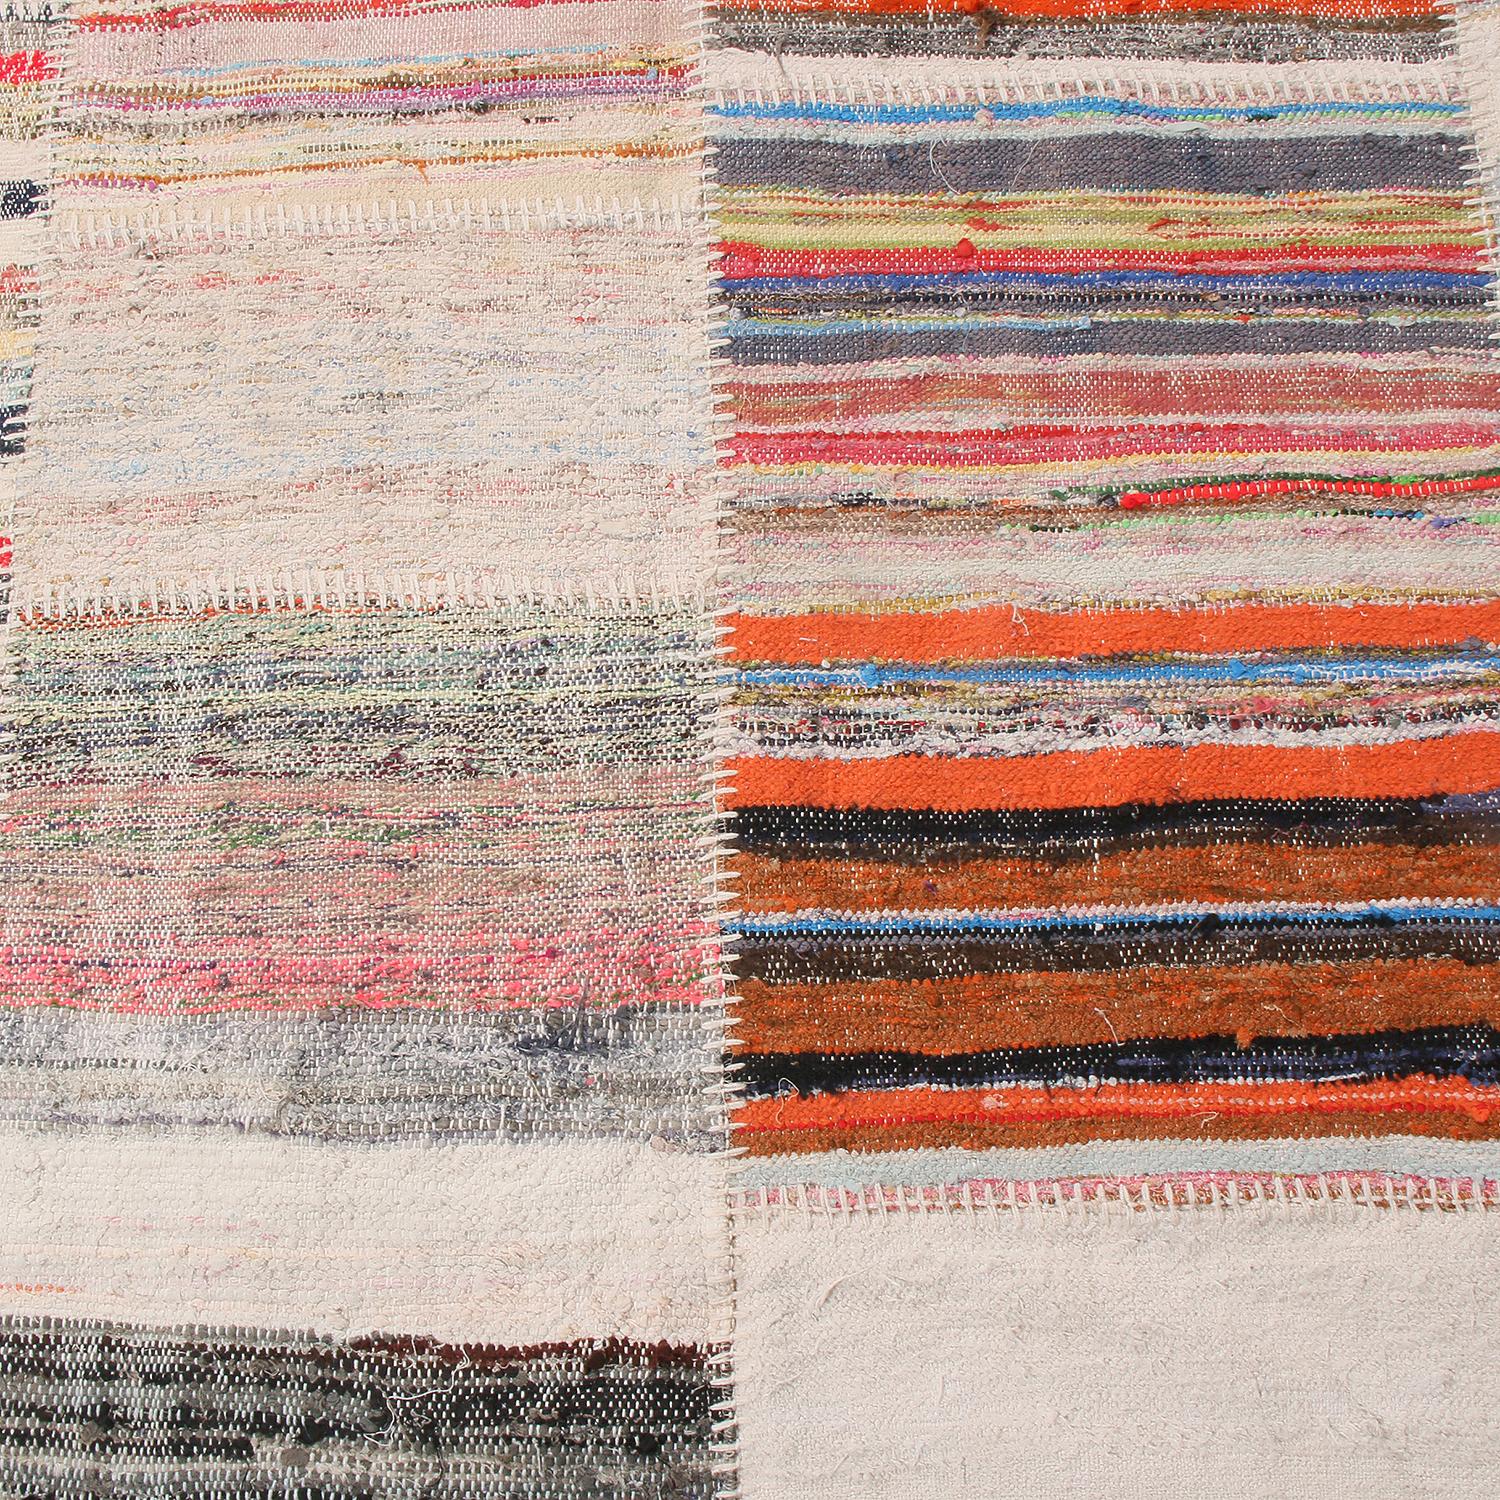 Hand-Woven Rug & Kilim’s Patchwork Beige and Multi-Color Wool Kilim Rug